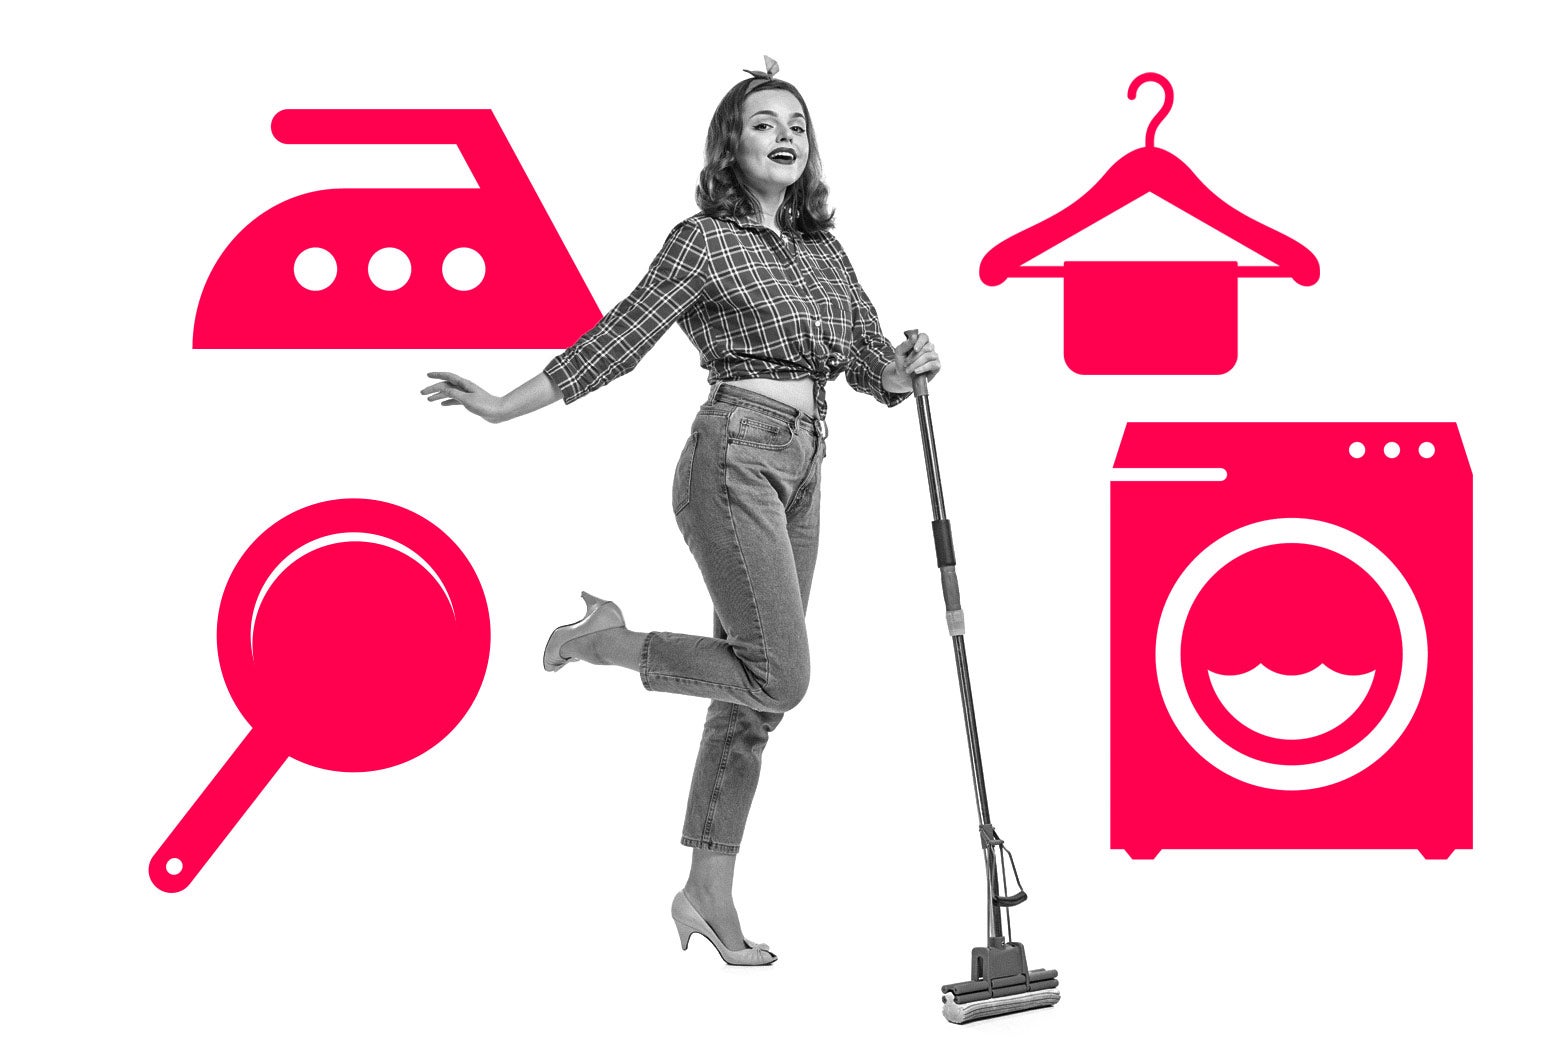 A woman poses happily with a mop next to other household items.